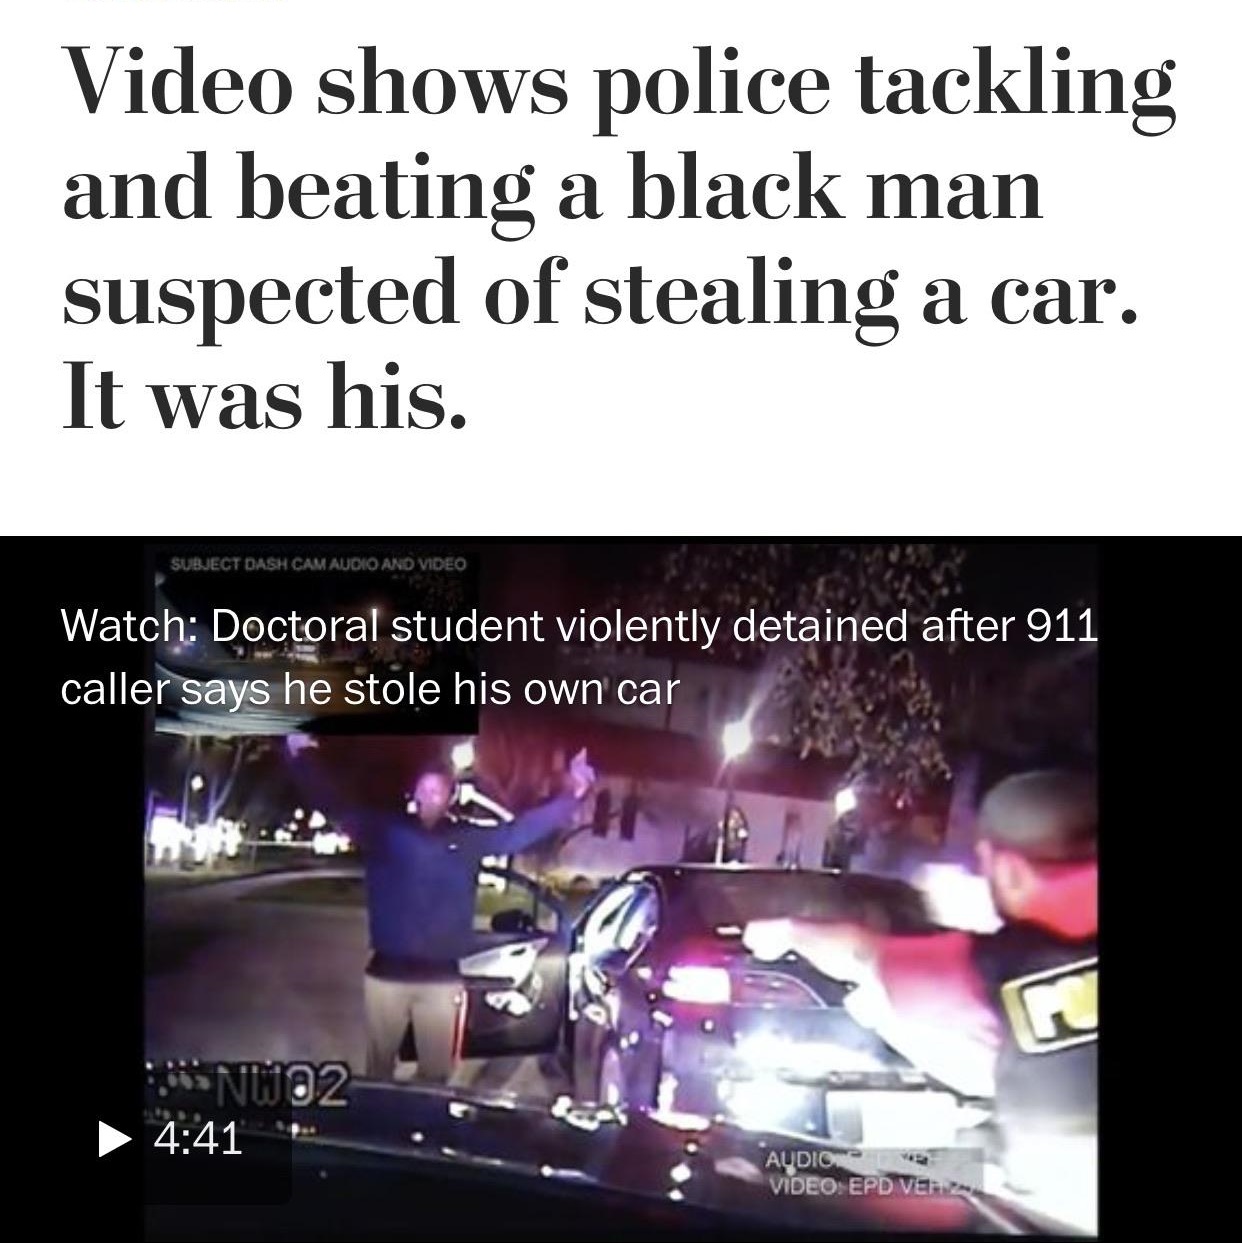 washington post - Video shows police tackling and beating a black man suspected of stealing a car. It was his. Subject Dash Cam Audio And Video Watch Doctoral student violently detained after 911 caller says he stole his own car MO2 Audio Video Epd Veh